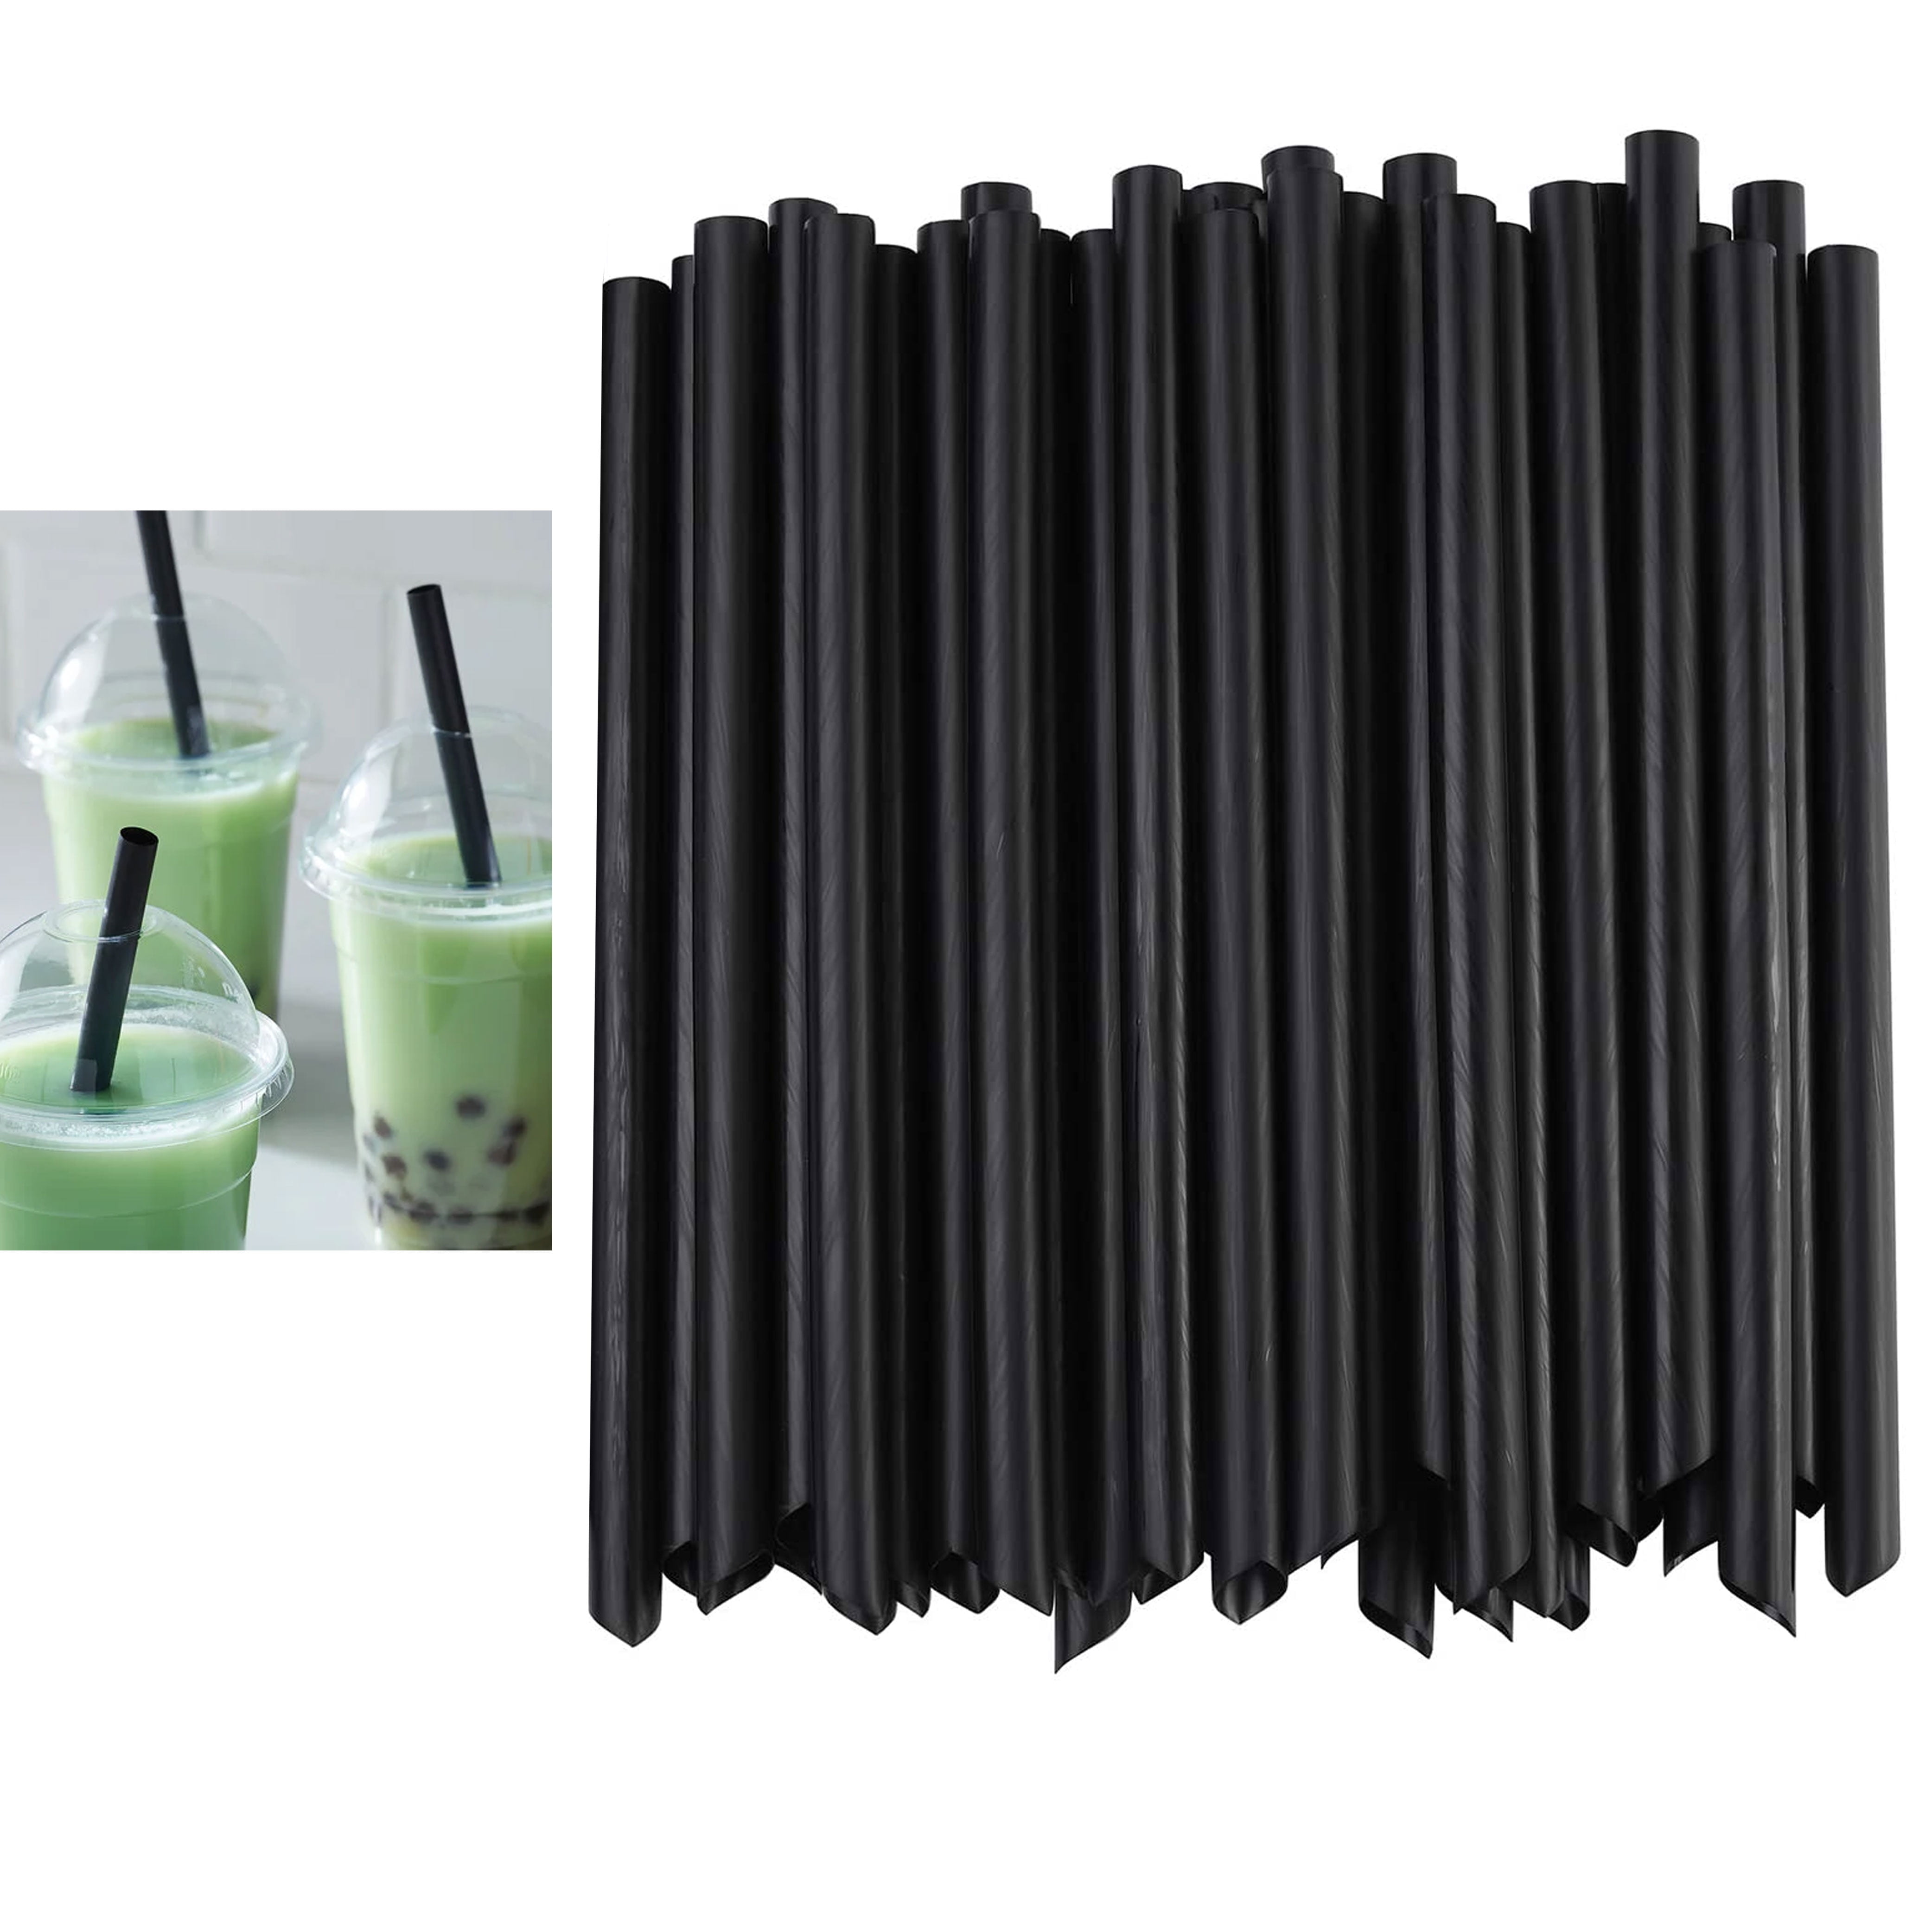 2 Point End BOBA Straw Stainless Steel Extra Wide 1/2 x 9.5 Long Tapioca  Pearl Bubble Tea Thick FAT Poke Puncture - CocoStraw Brand